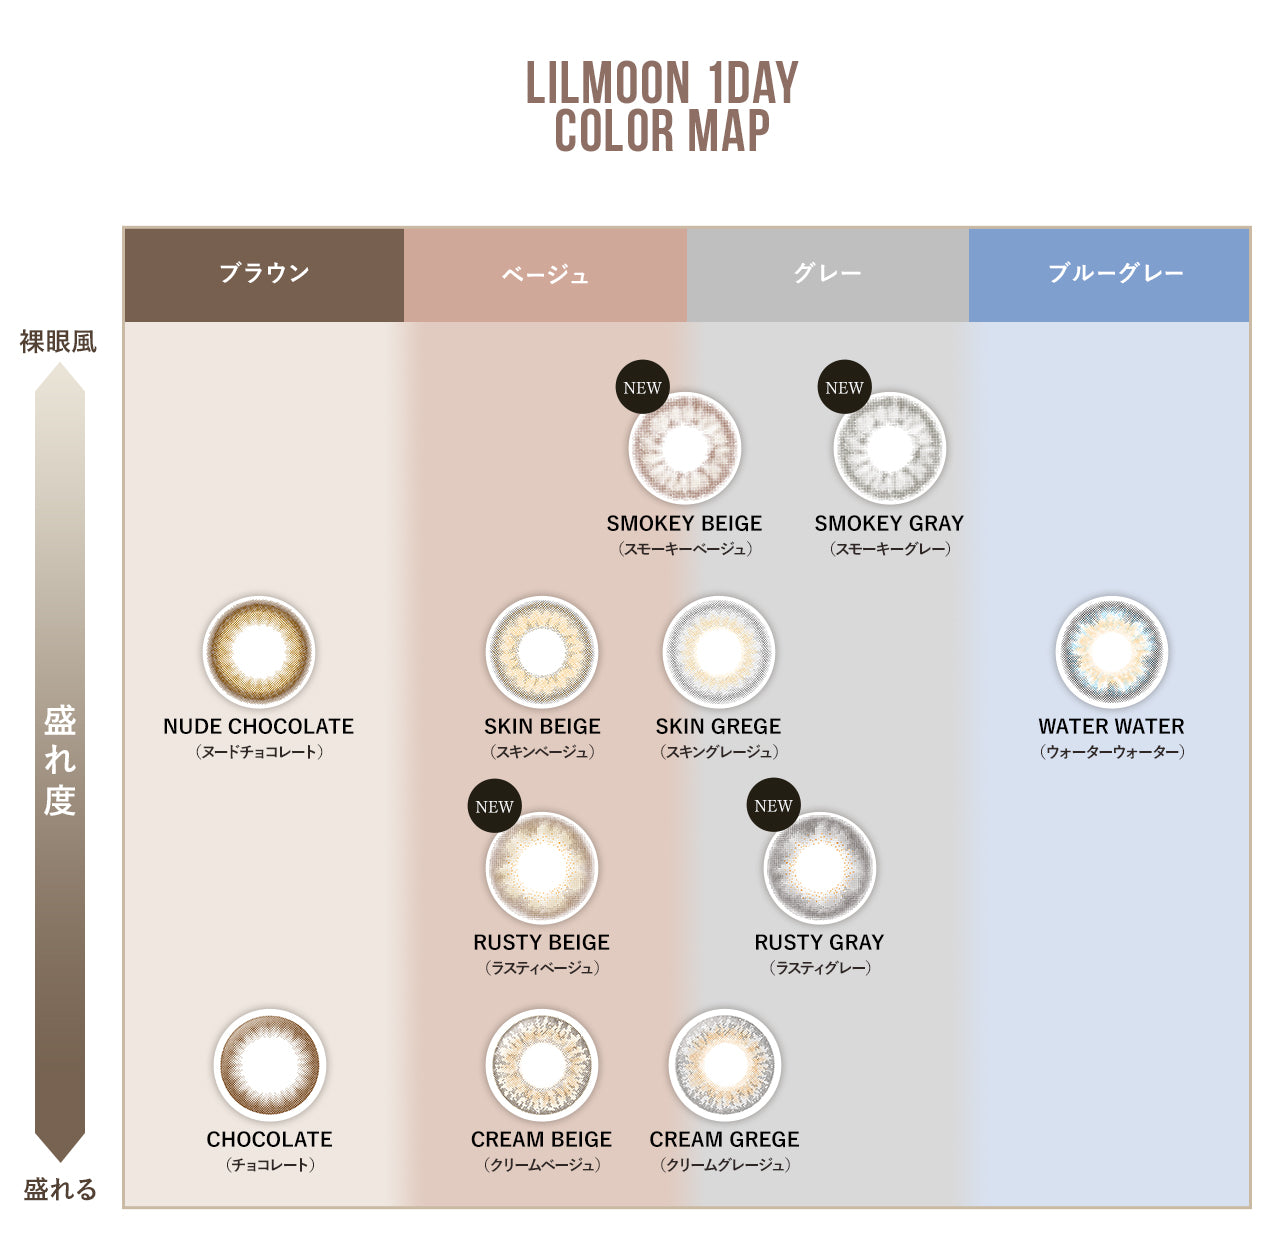 Lilmoon Water Water | 1day 10 pieces – Push!Color | Color Contact Lens